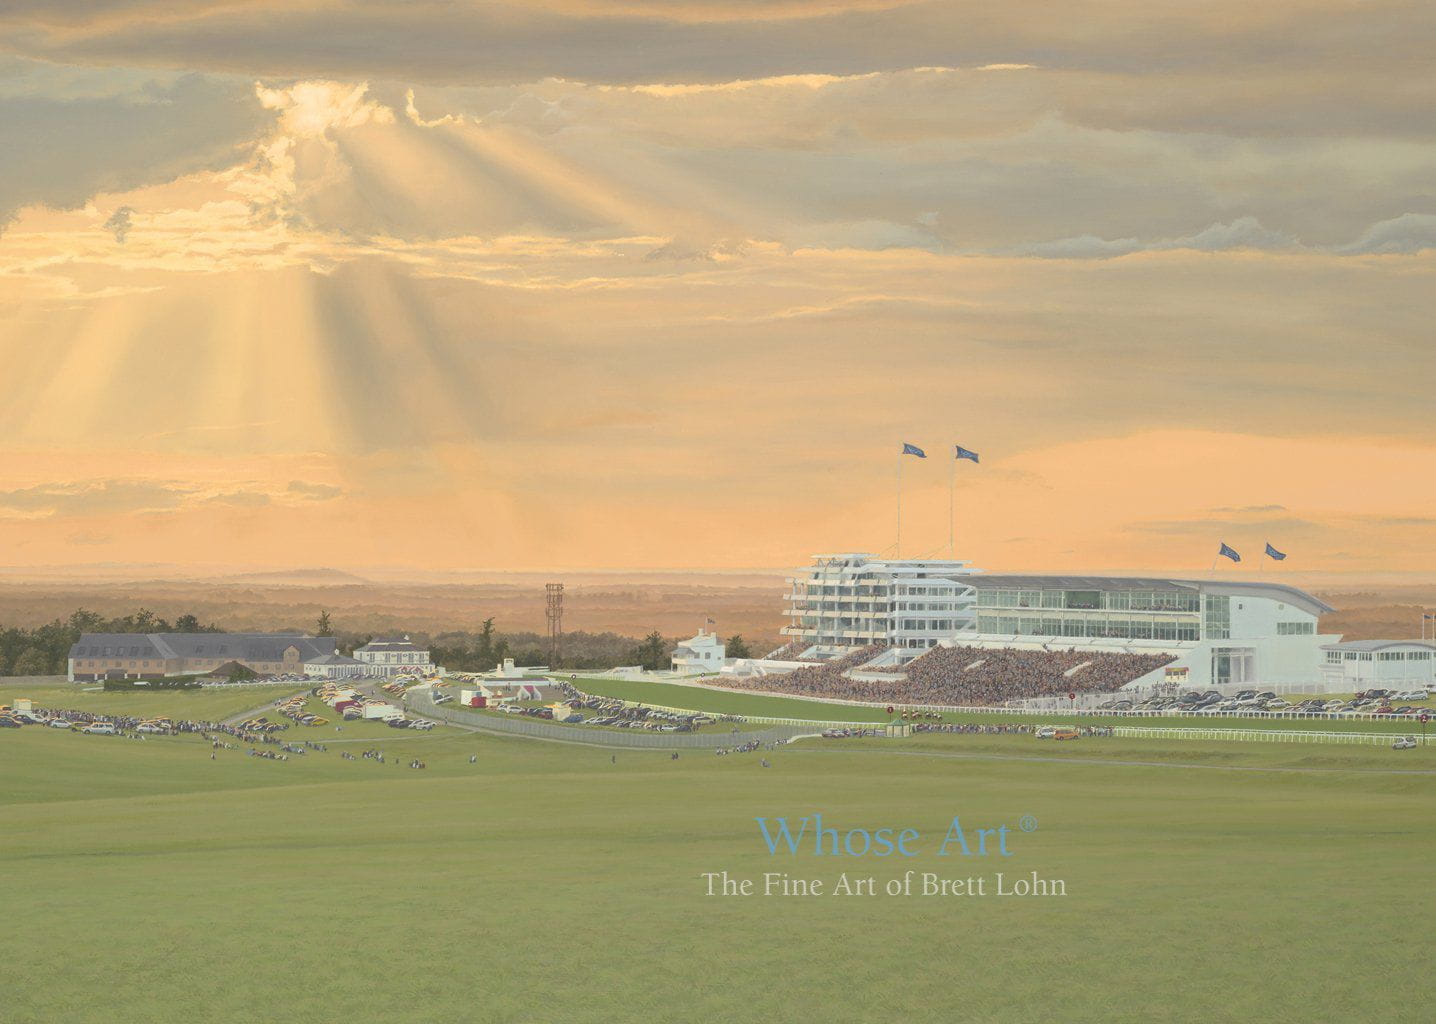 Epsom Derby greeting card of an oil painting of a race at Epsom Downs Racecourse beneath a stormy sunset sky with rays of sunlight. A dramatic greeting card.